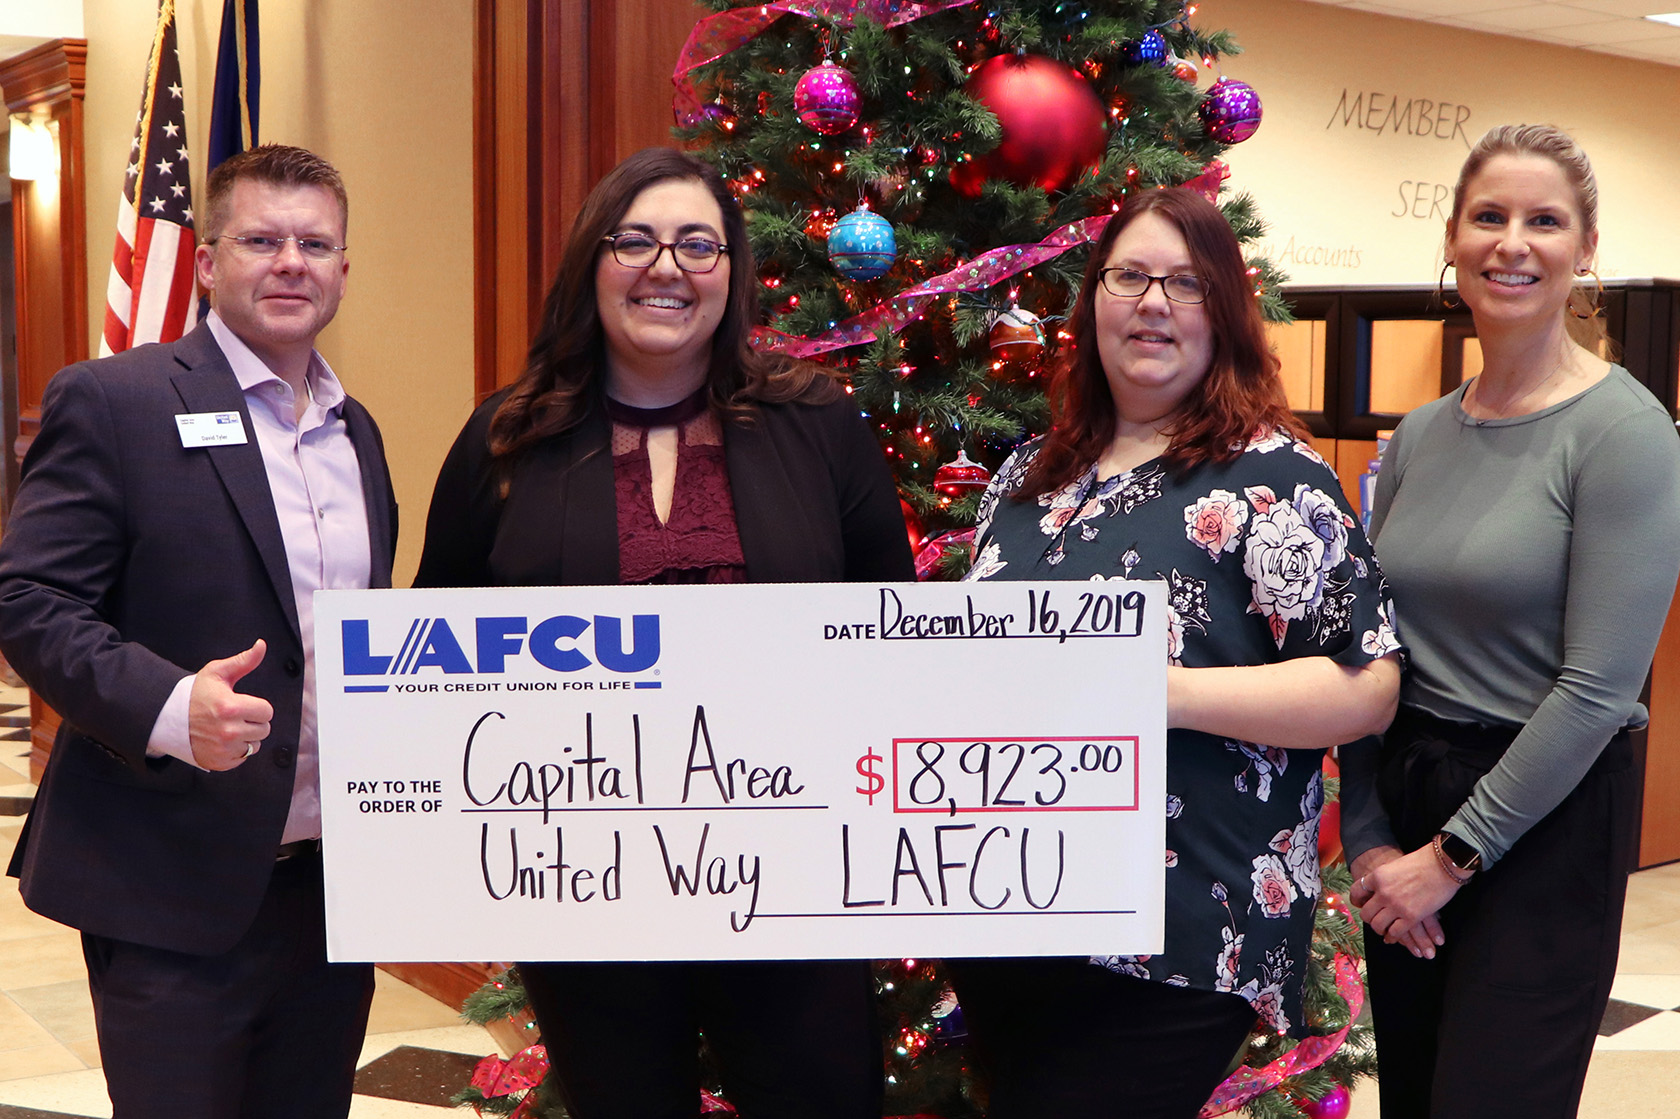 LAFCU-CAUW.jpg – From left, Capital Area United Way’s David Tyler accepts a ceremonial check for $8,923 from LAFCU Giving Committee members Amanda Seger, Teri and Suzi. Funds were raised internally at LAFCU through dress down days and other events in 2019.